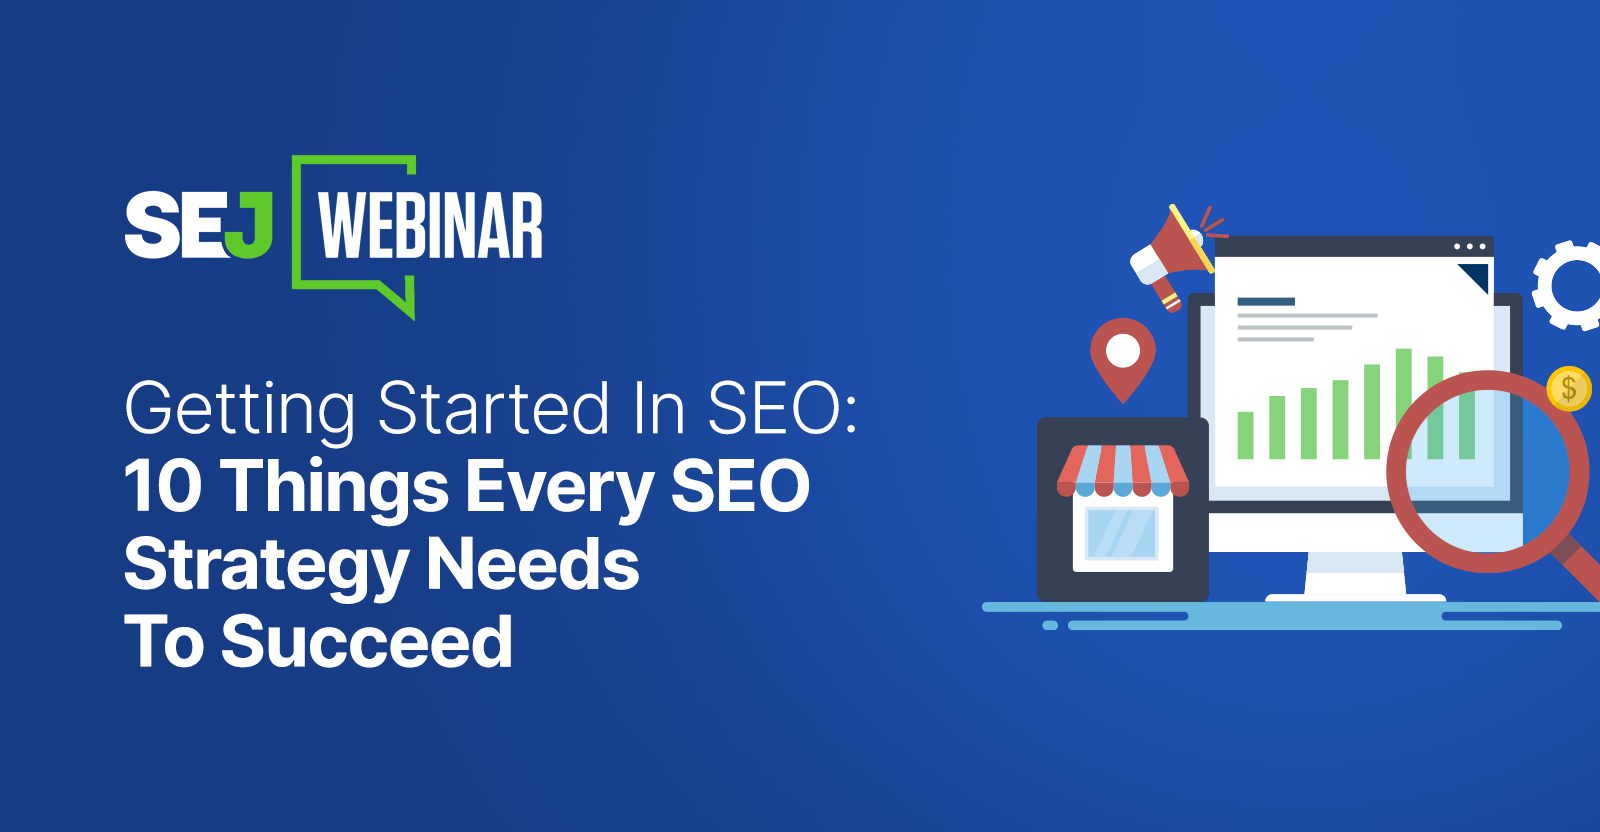 Getting Started In SEO: 10 Things Every SEO Strategy Needs To Succeed [Webinar] via @sejournal, @hethr_campbell